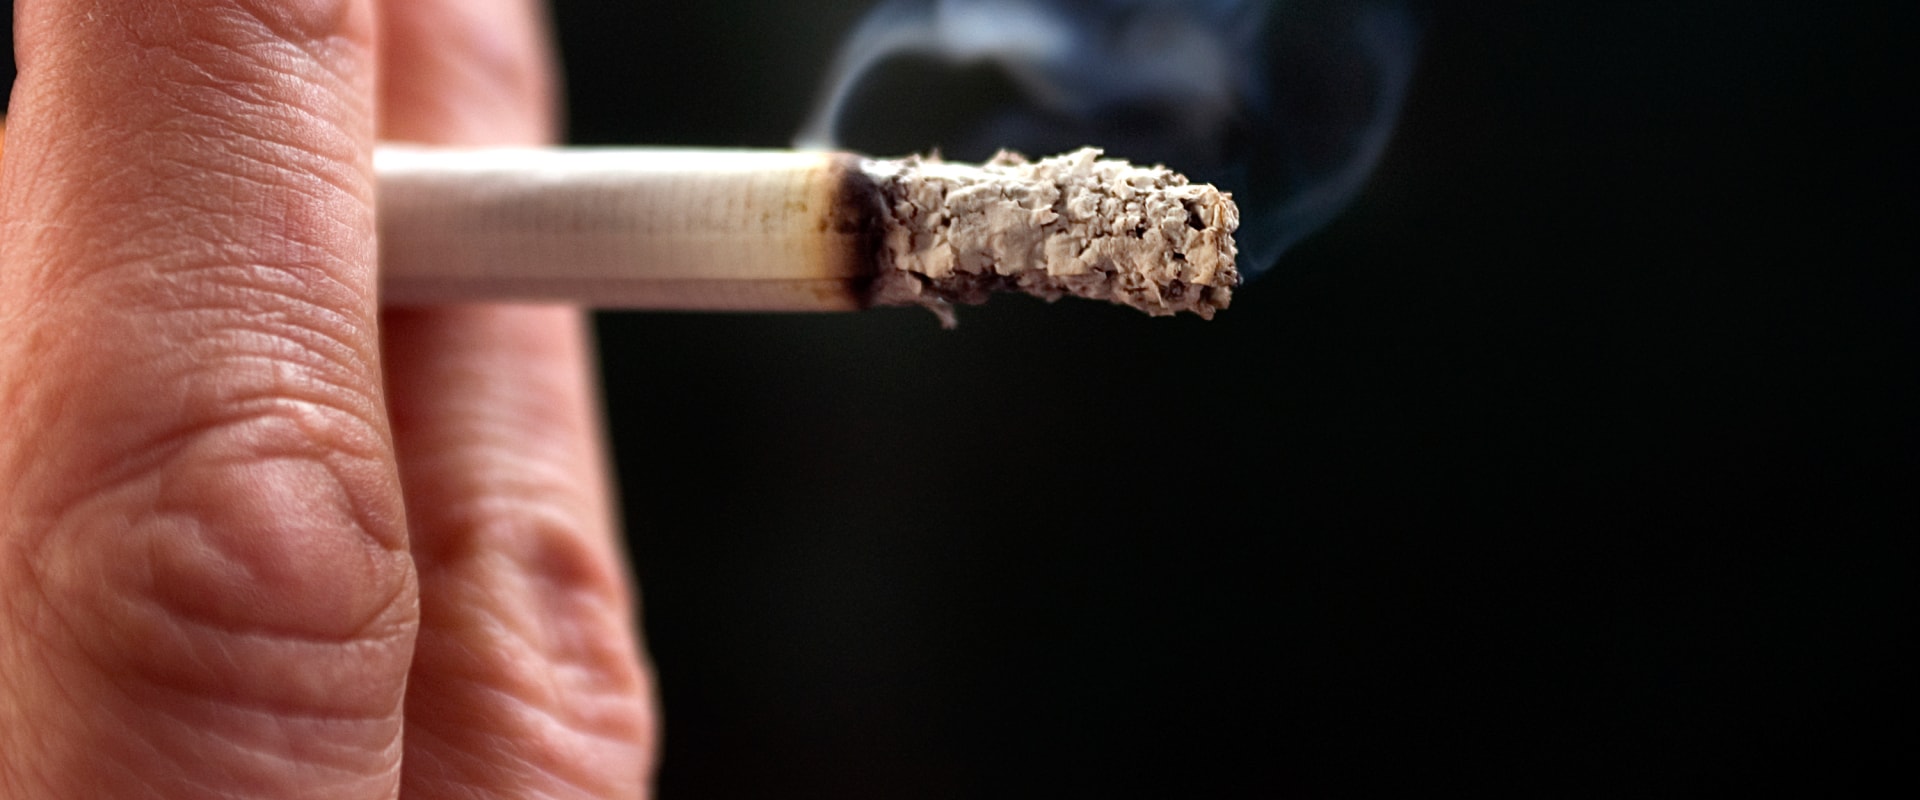 The Impact of Smoking Laws in Bullitt County, KY